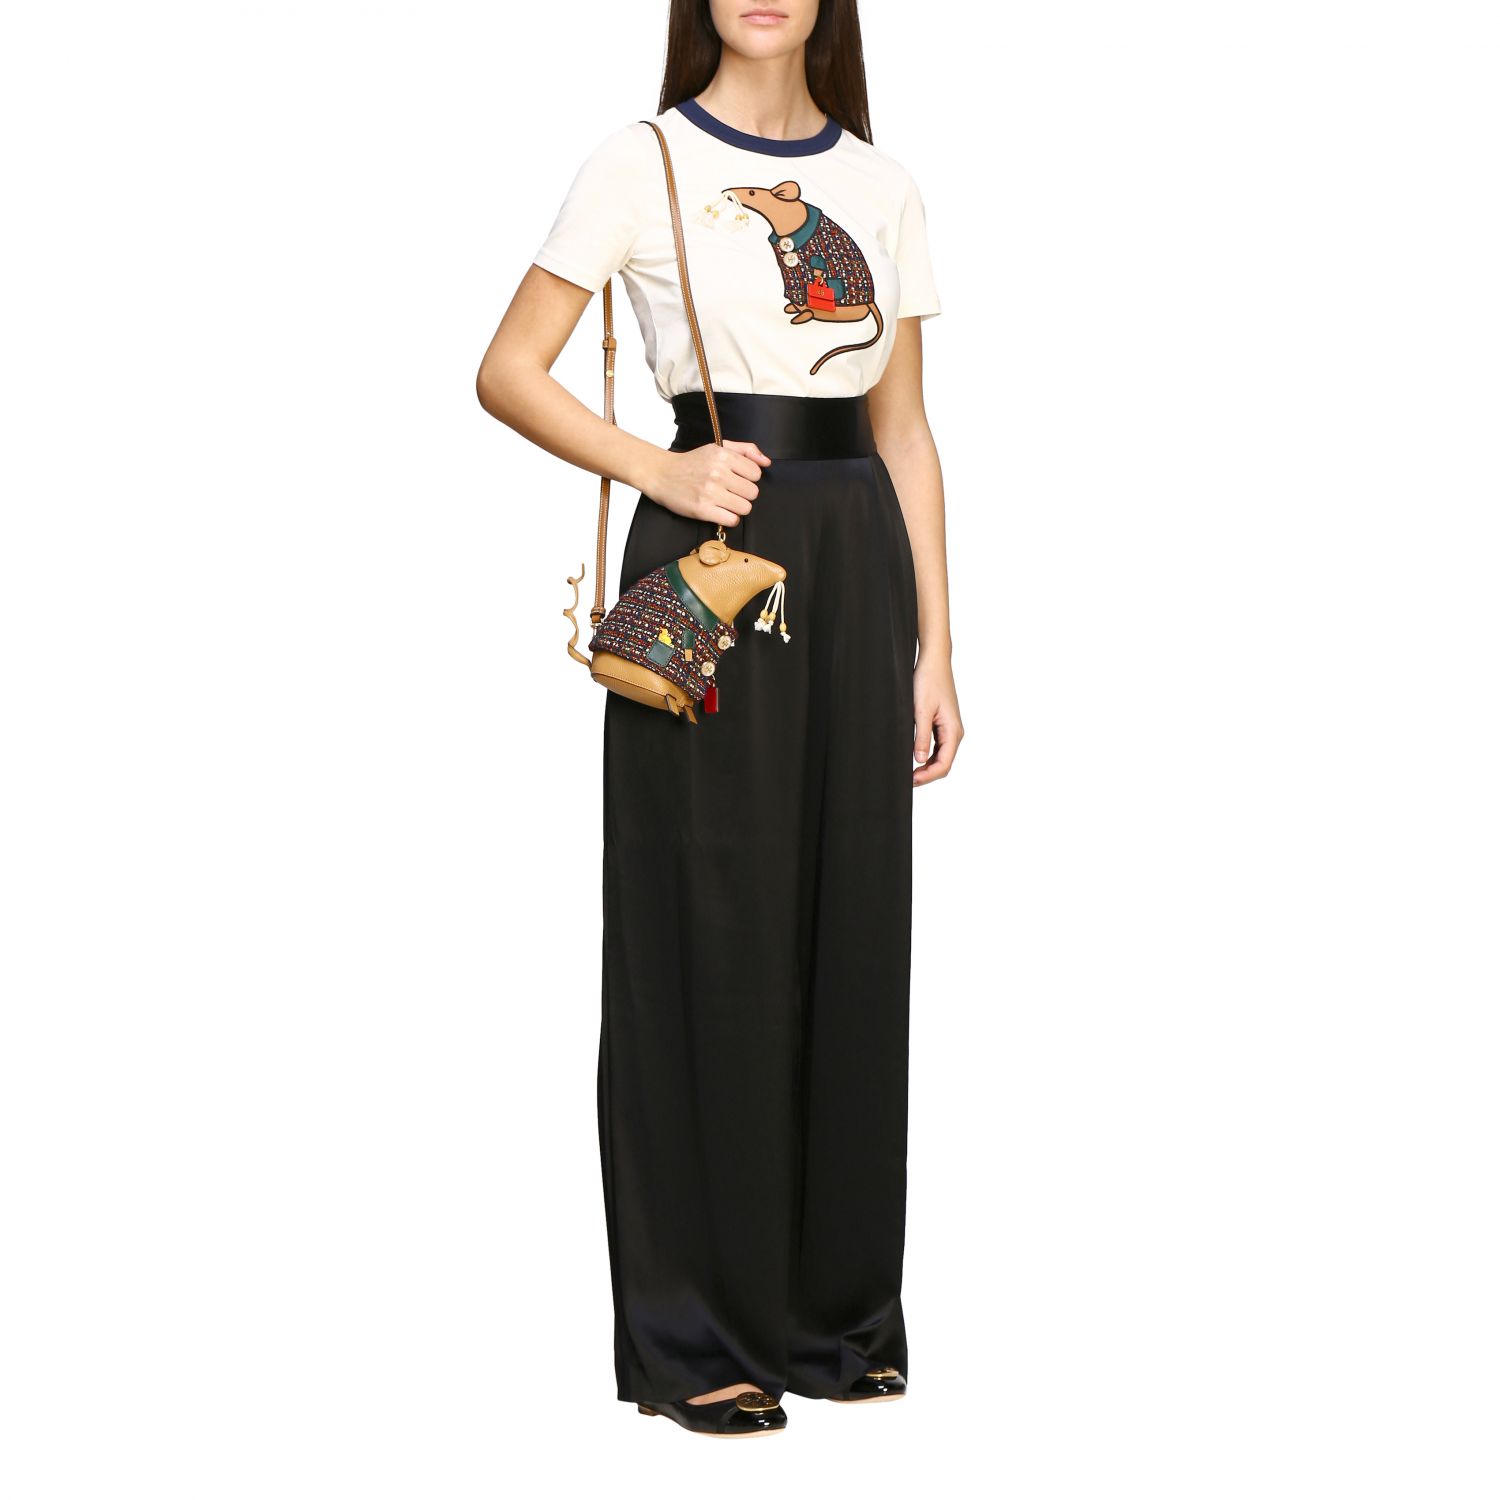 Tory Burch Outlet: high-waisted trousers - Black | Tory Burch pants 61335  online on 